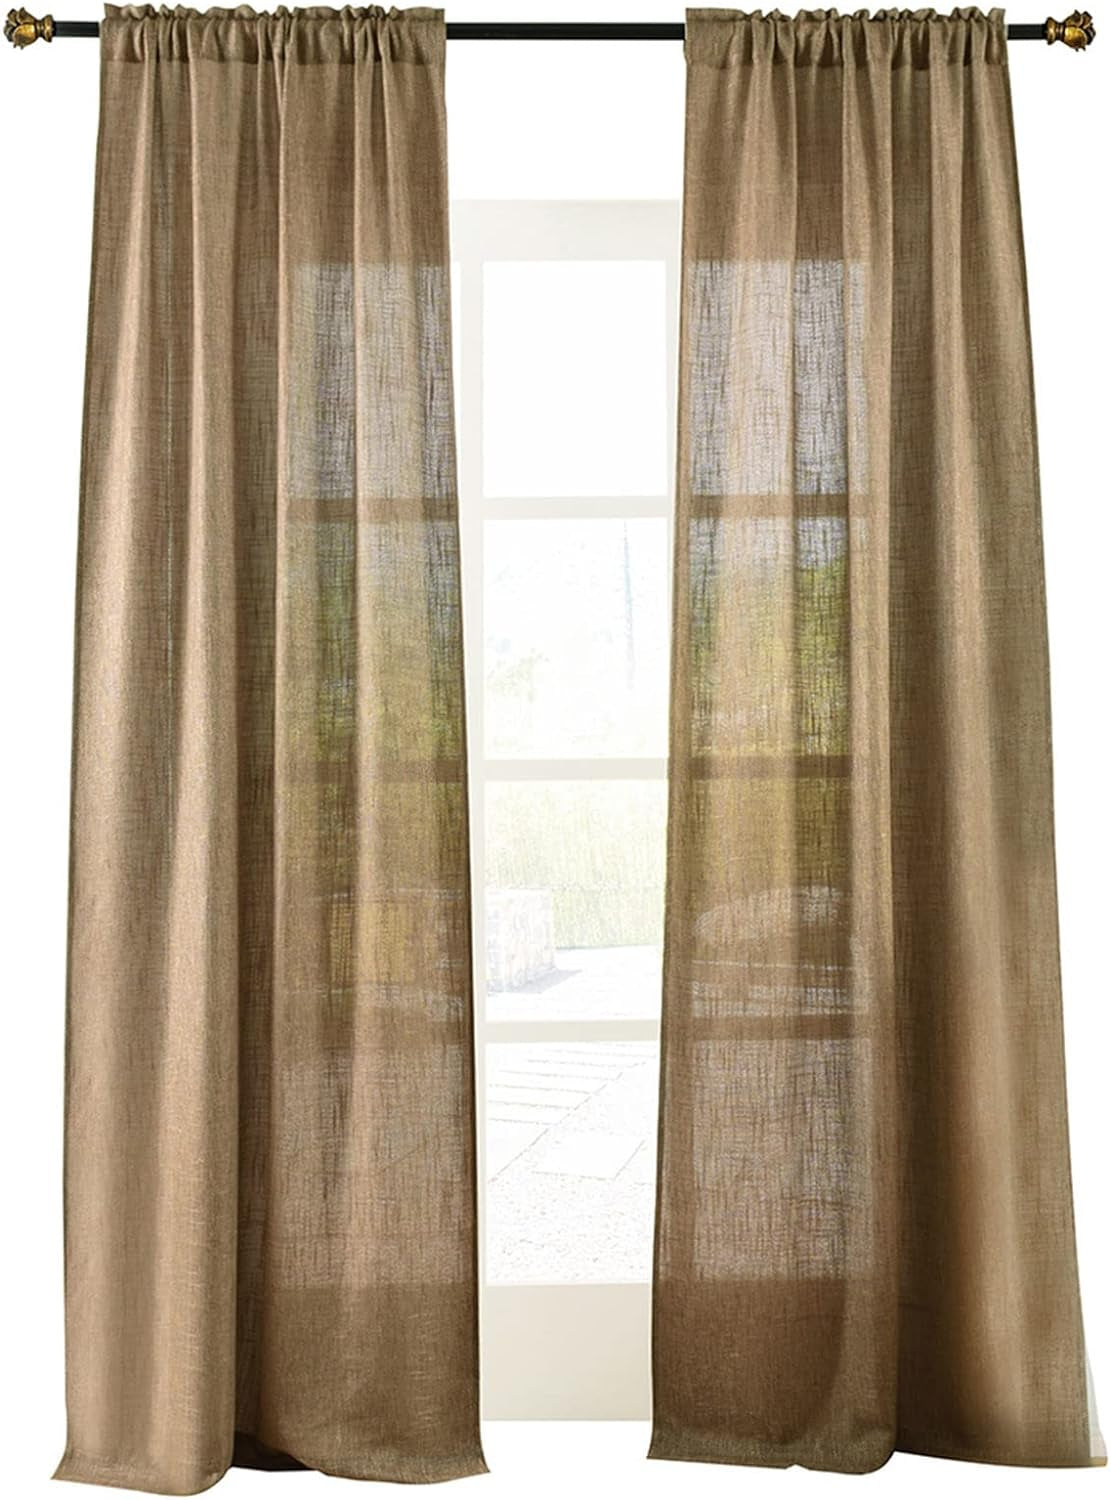 Valea Home Soft Burlap Short Curtains Rustic Natural Rod Pocket Curtain Panels for Small Window 45 Inch Length Cafe Kitchen Curtains, 2 Panels, White  Valea Home Tan 52"Wx90"L 